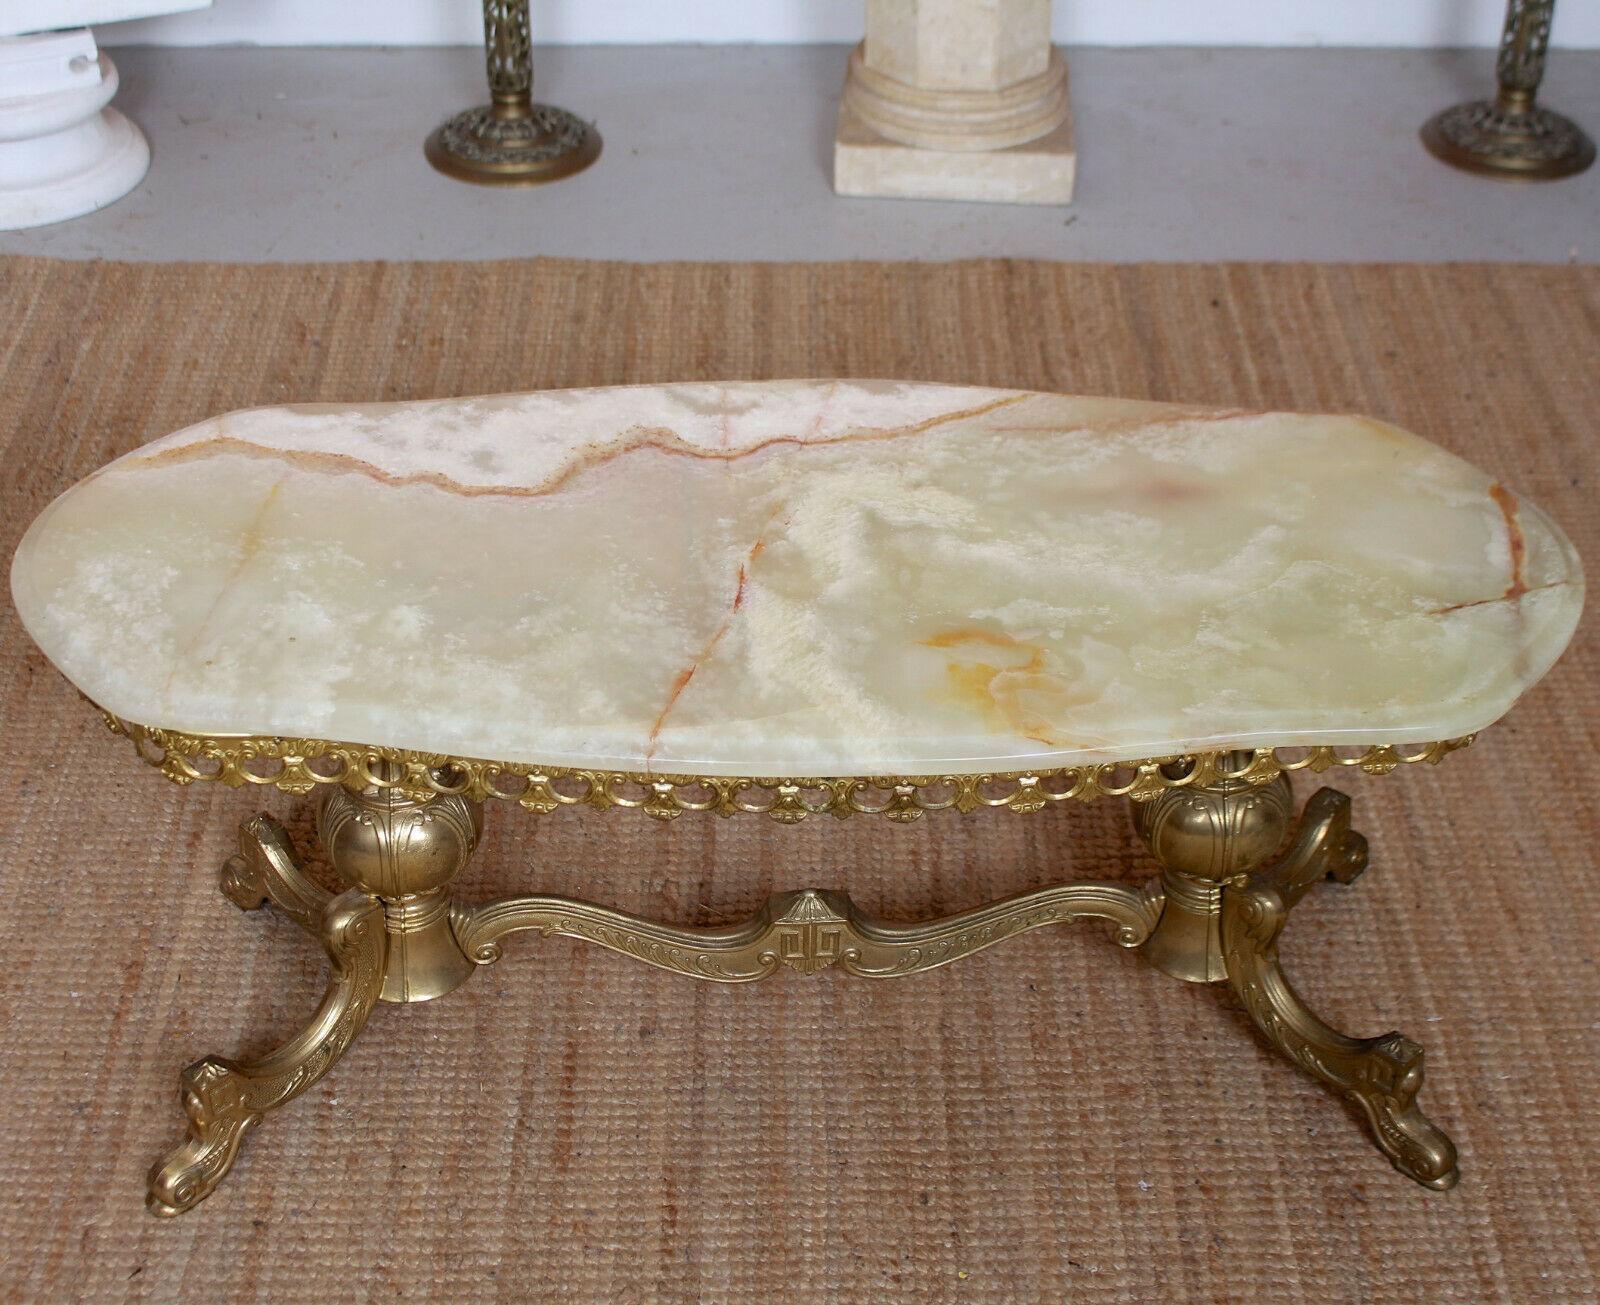 A fine quality 20th century Italian coffee table in the Rococo manner.
The brass base features a pierced gallery apron decorated with scrolls and acanthus motif and raised on capped scrolled feet.
Warm-toned and loaded with visual textures, the